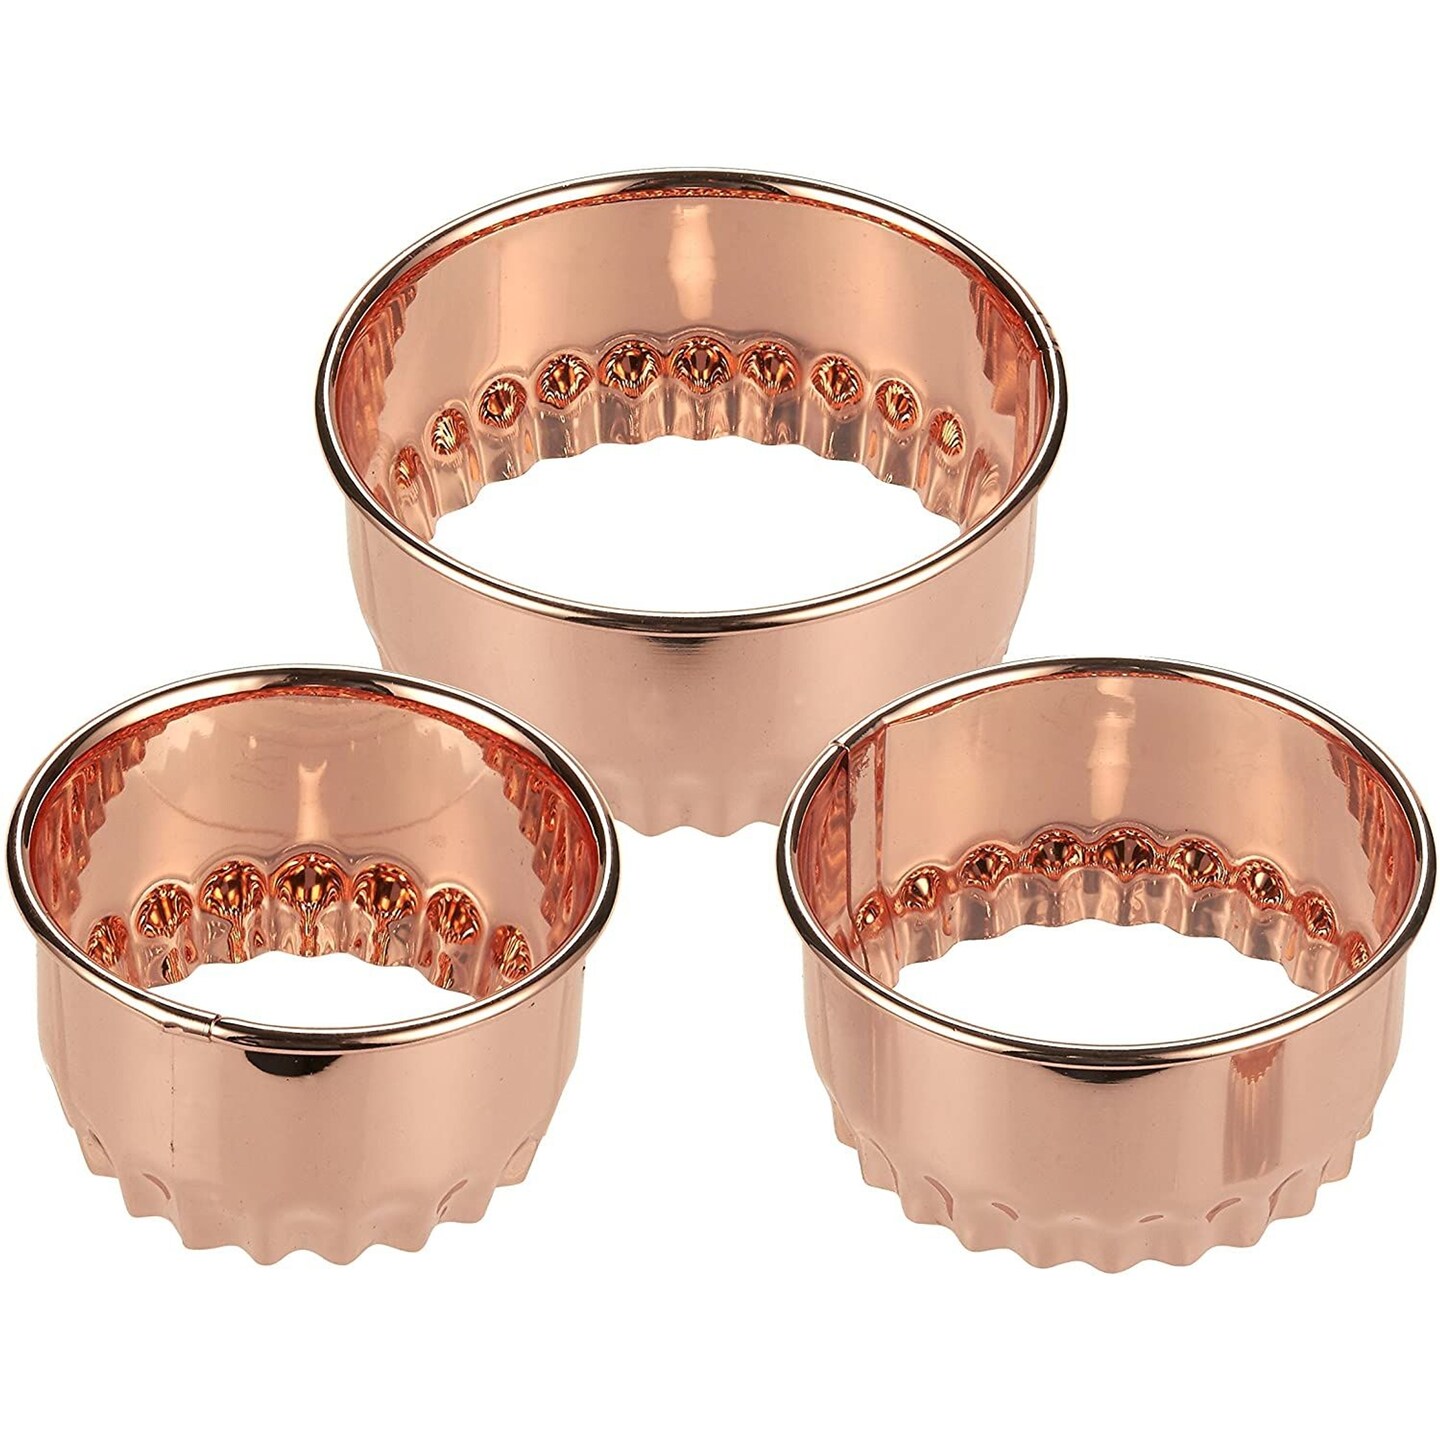 Two-Sided Copper Cookie Cutter Set for Pastries, Baking, Desserts (3 Pieces)